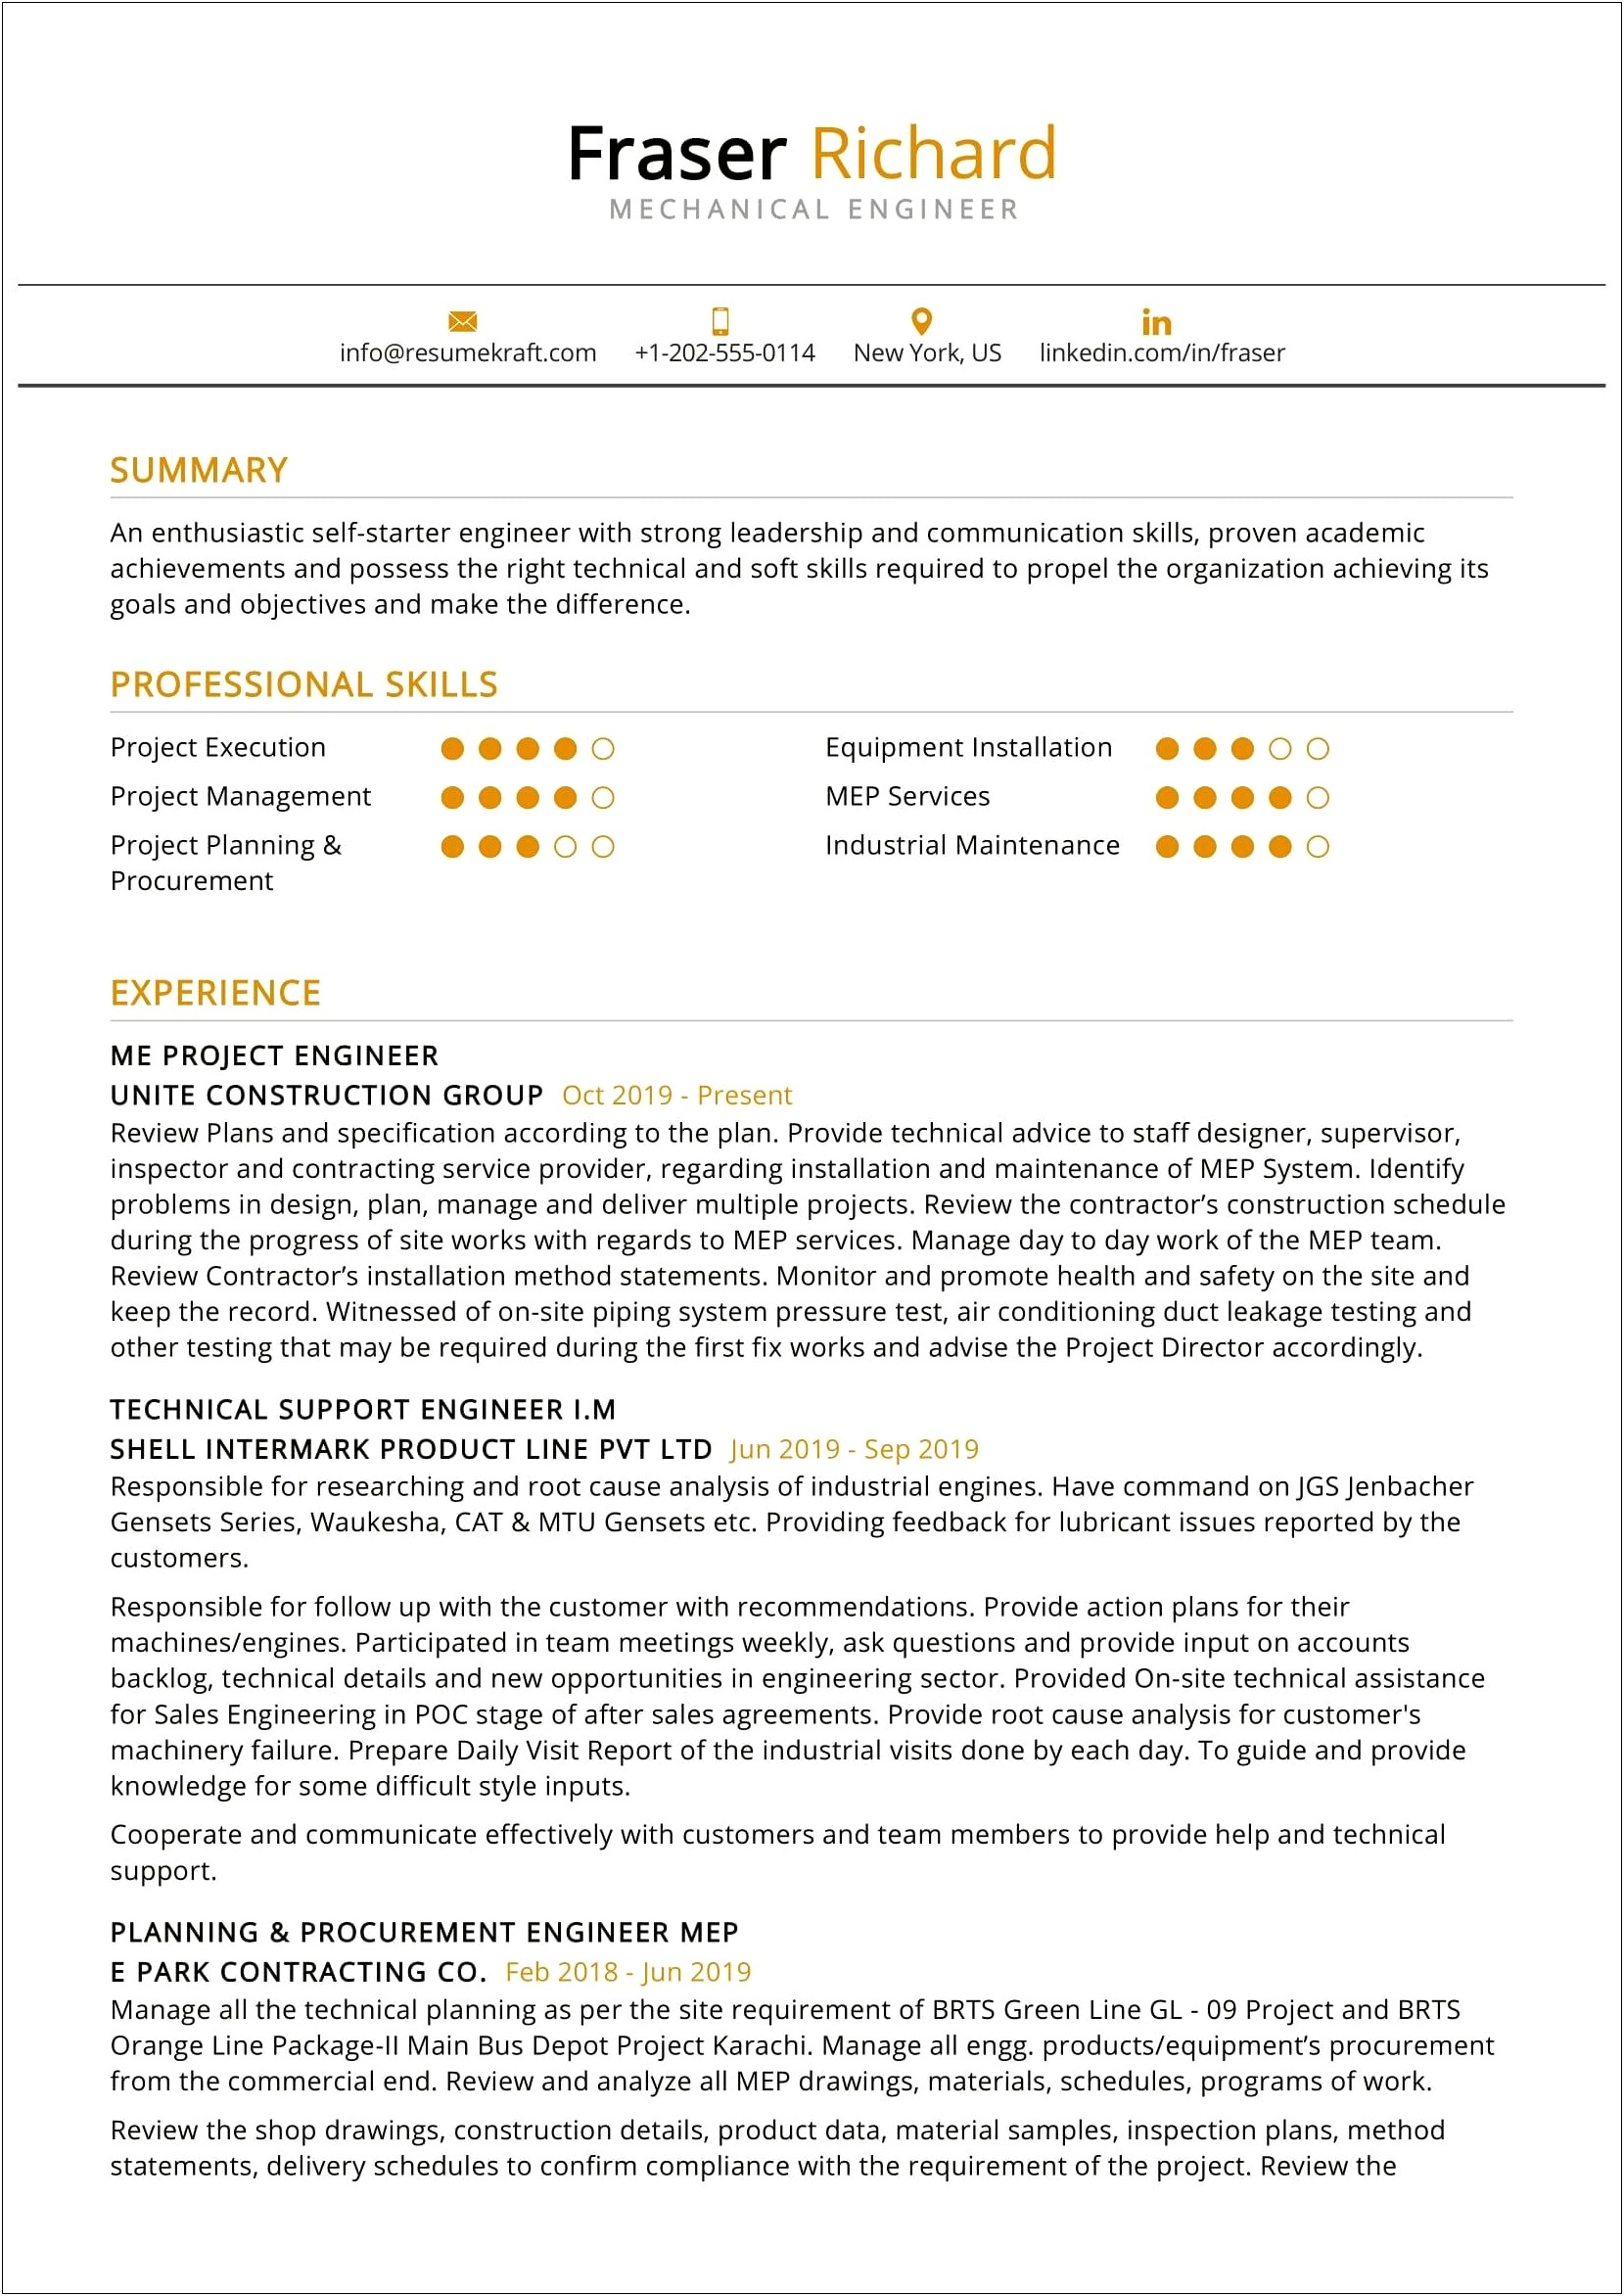 Examples Of Academic Achievements For Resume